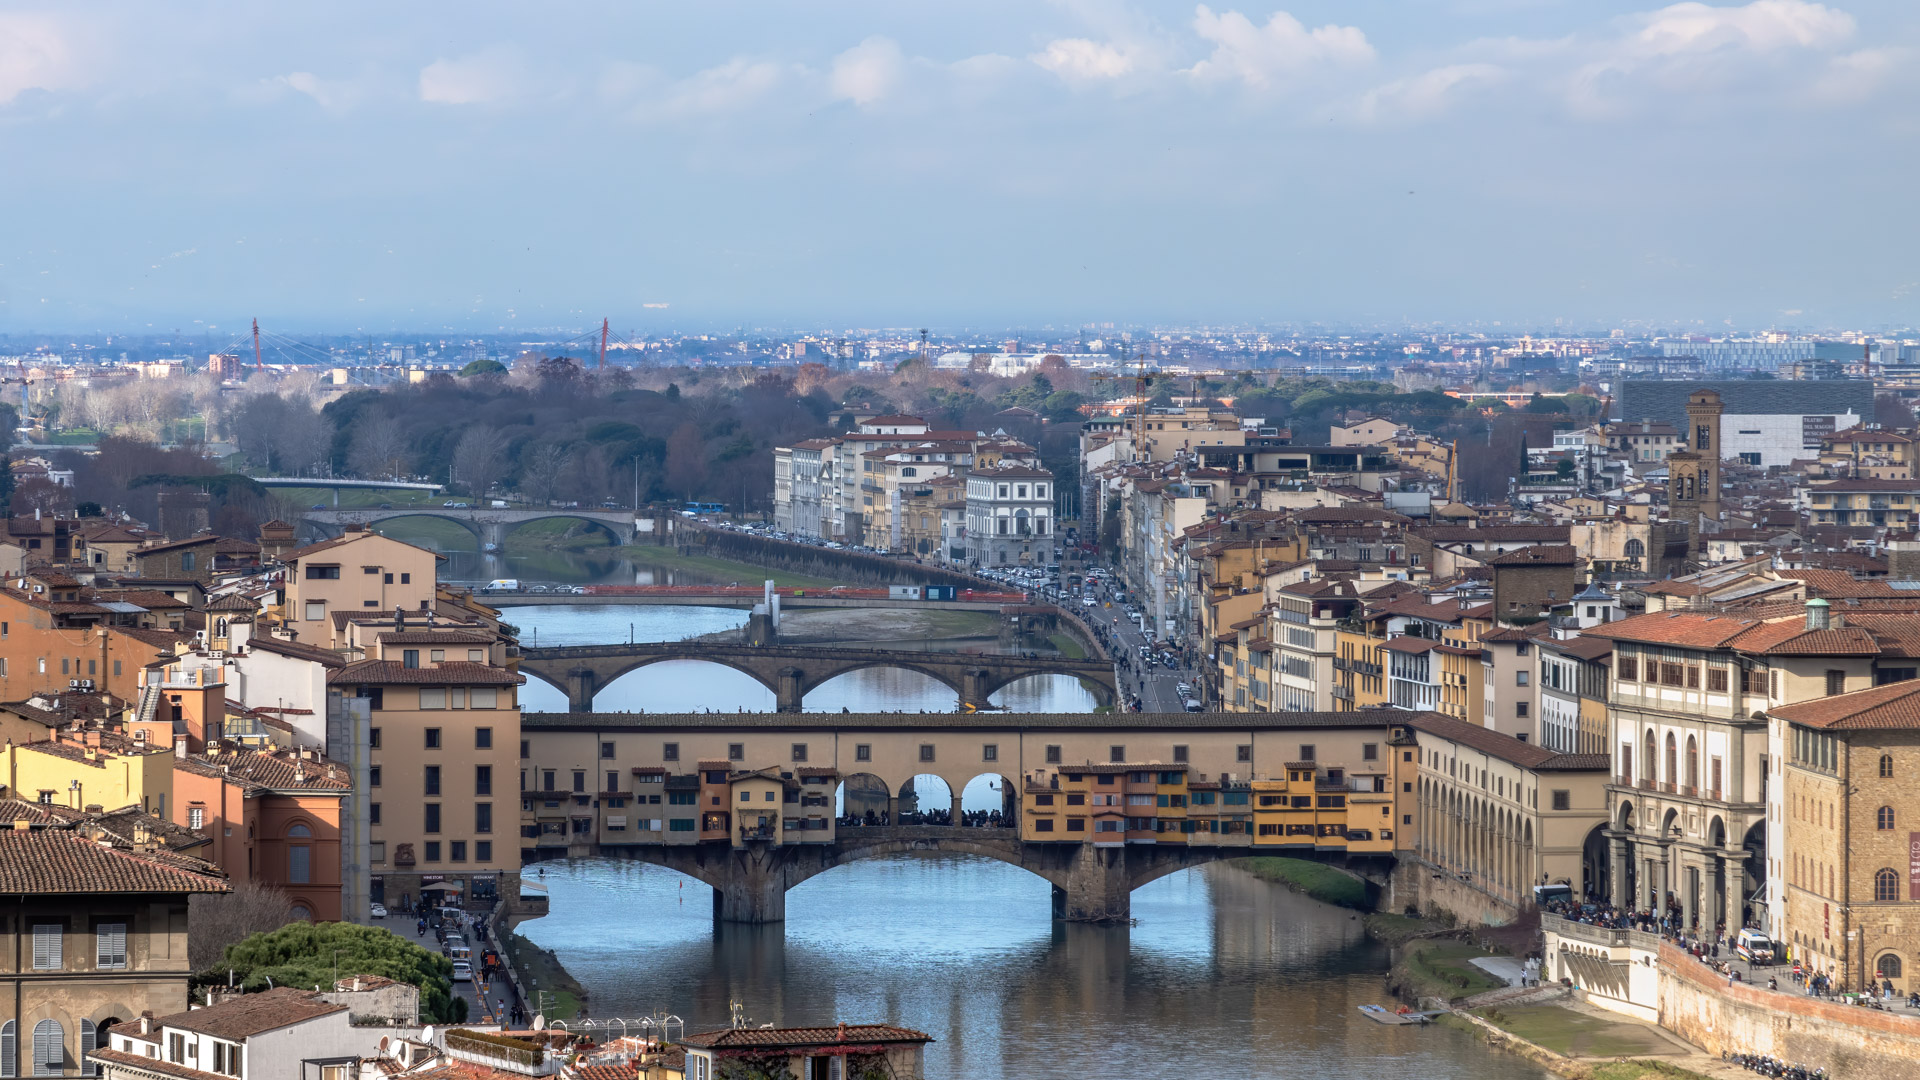 Transport your screen to the enchanting streets of Florence, Italy, with our city wallpaper highlighting iconic landmarks and charming streets.